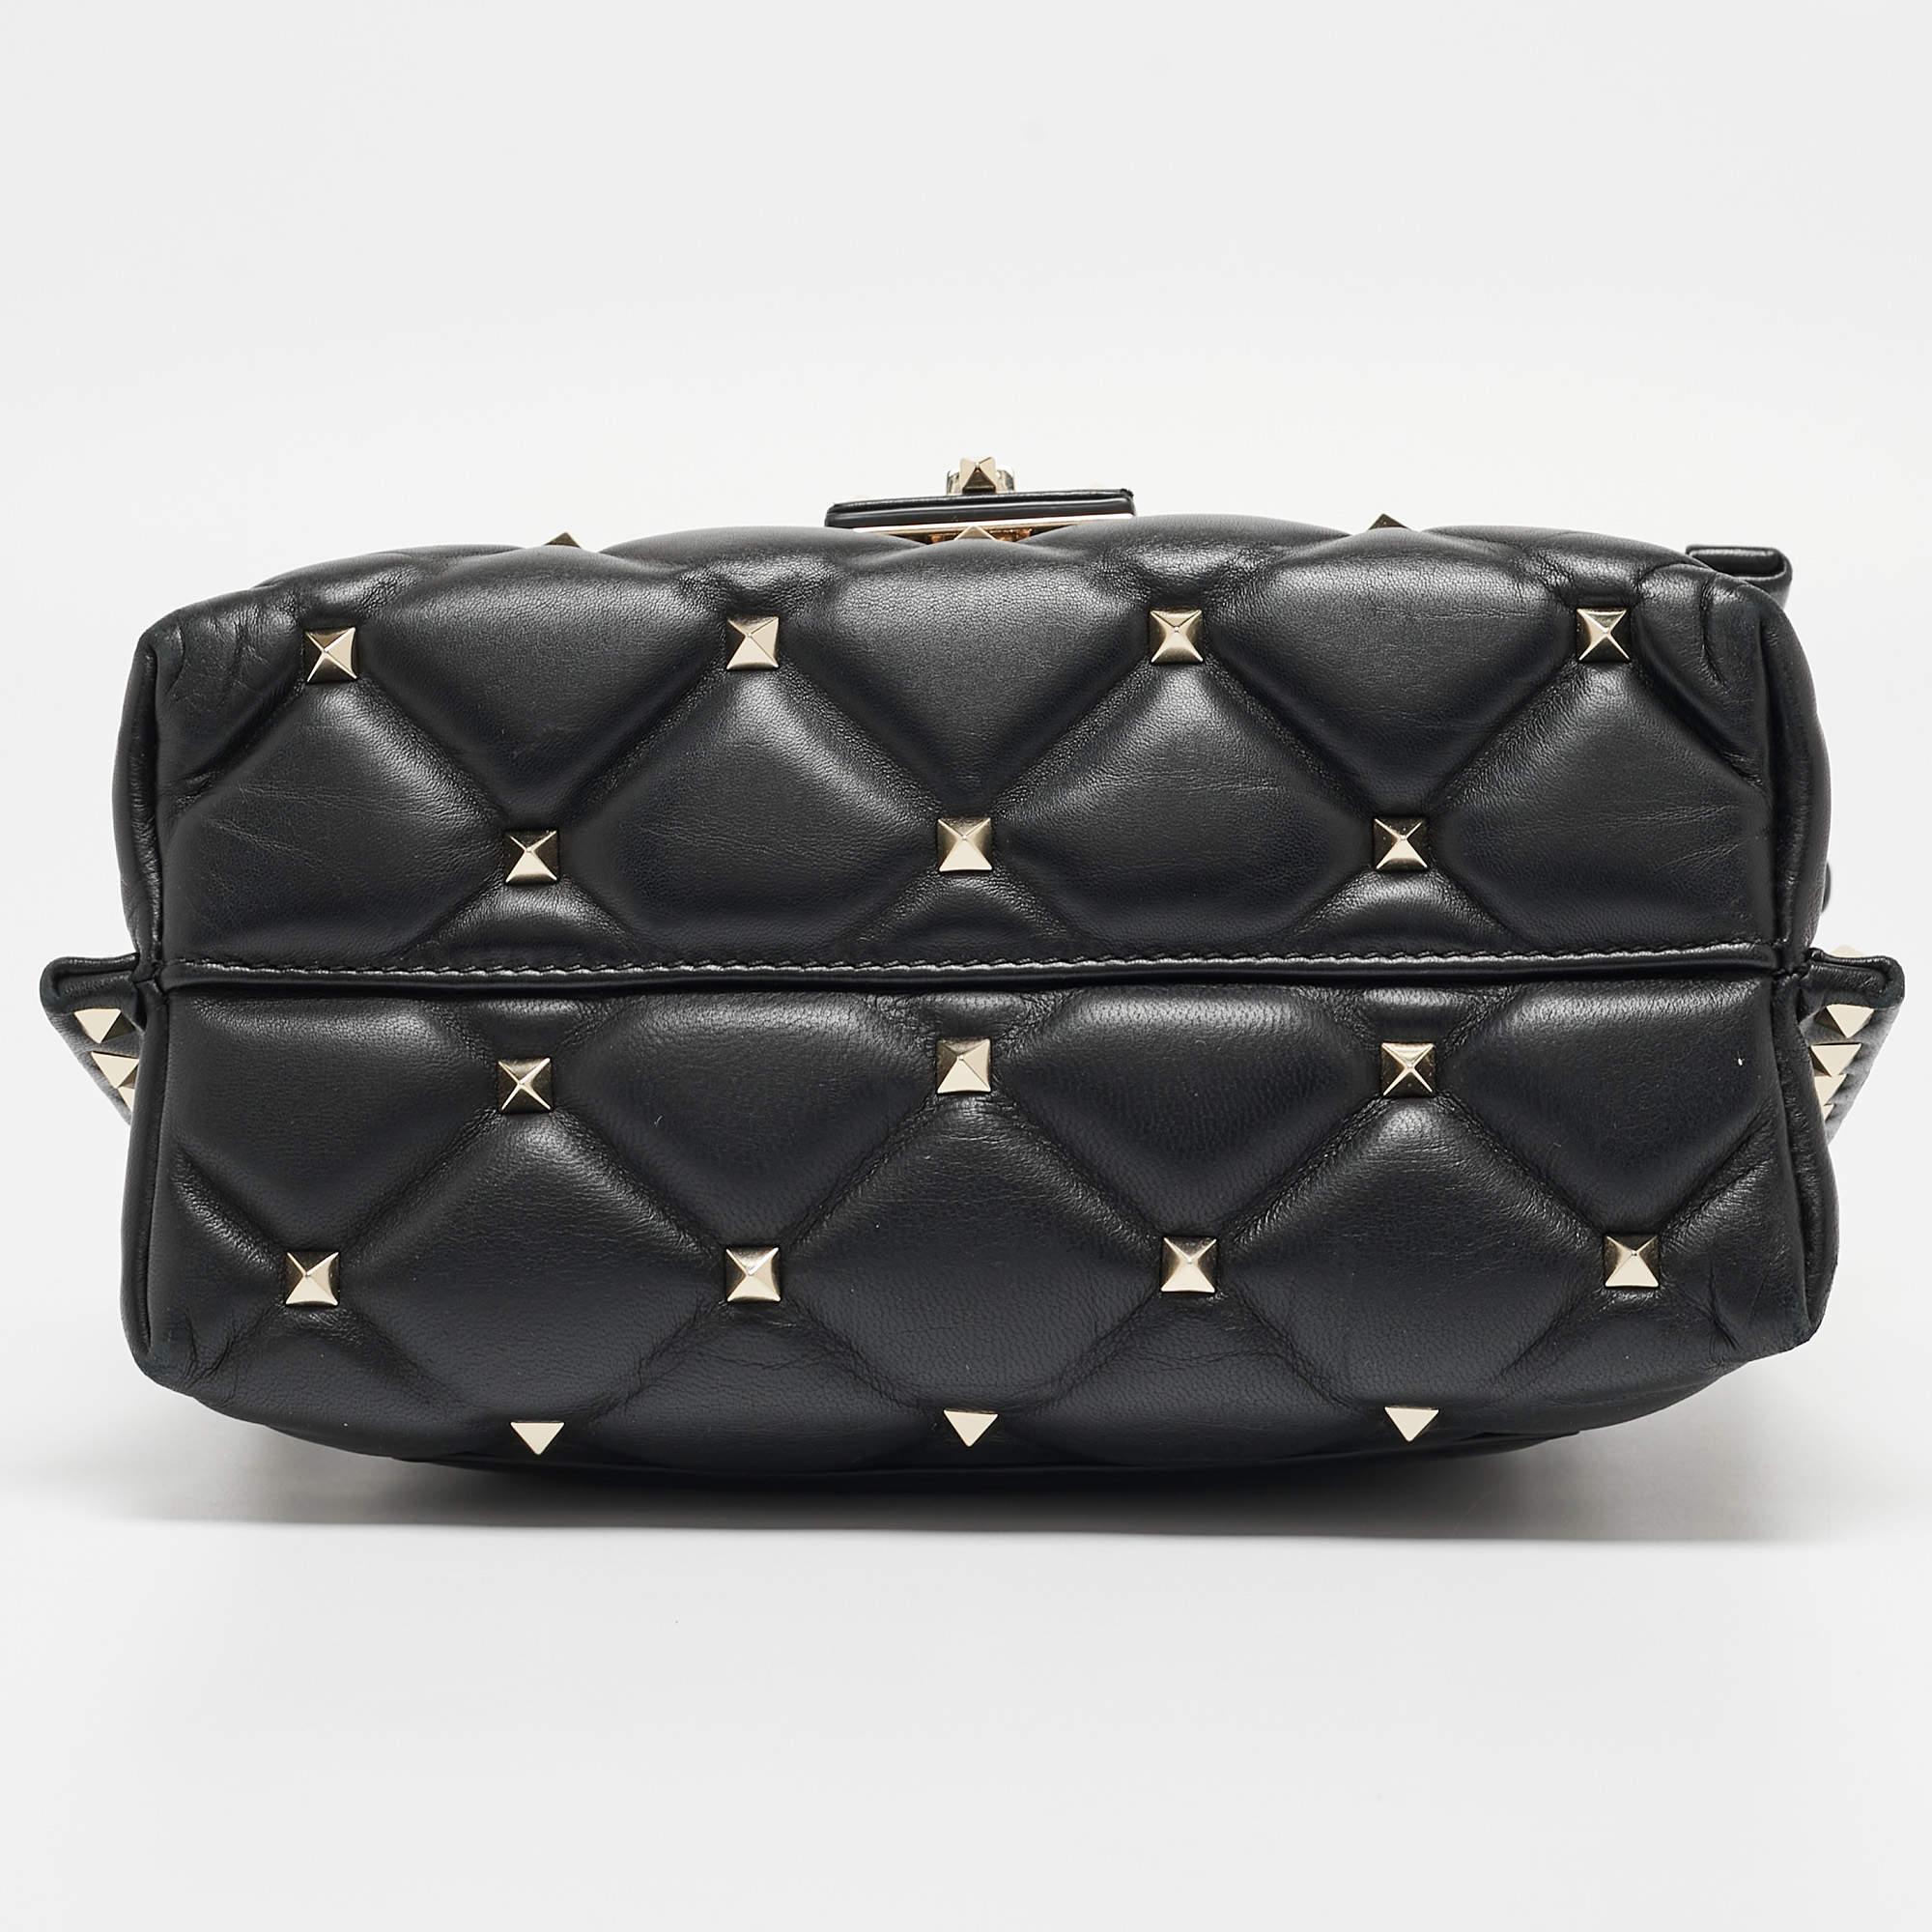 Valentino Black Quilted Leather Medium Candystud Top Handle Bag 3